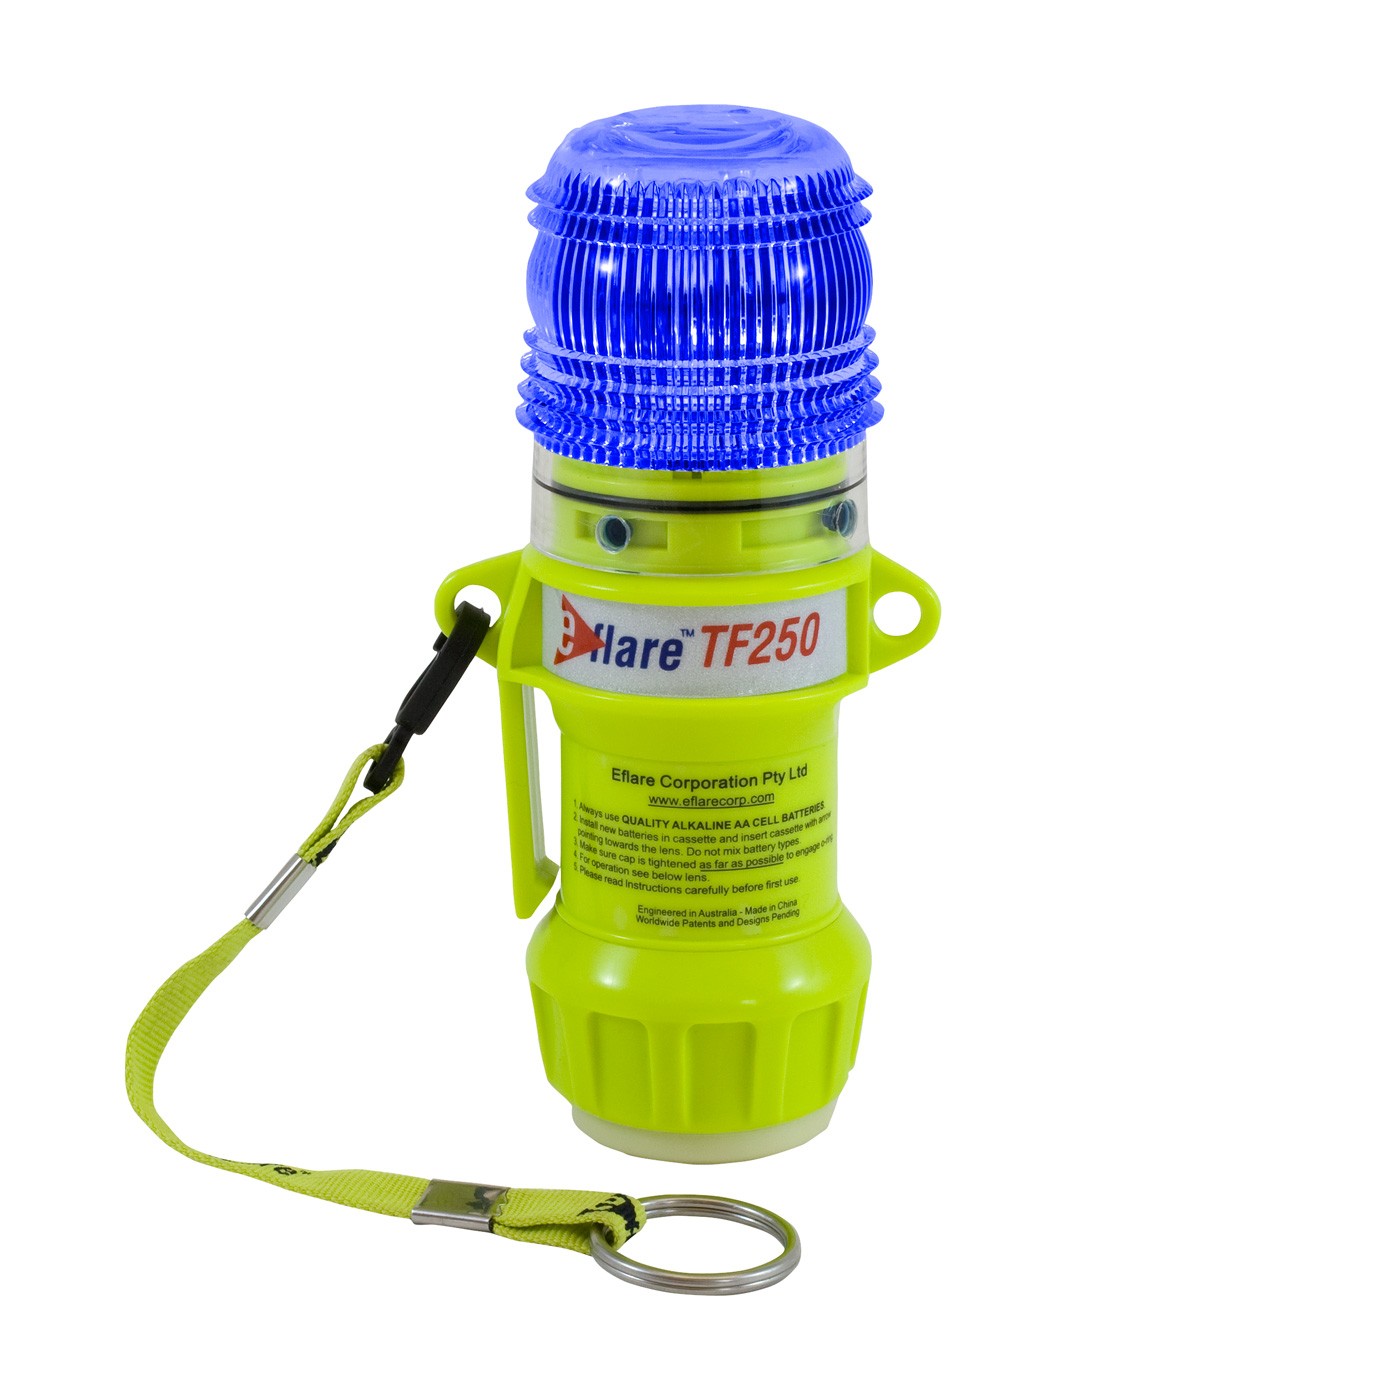  Eflare™ 6" Safety & Emergency Beacon with Steady-On Worklight and Magnetic Base - Flashing Blue  (#939-TF250-B-ASY)